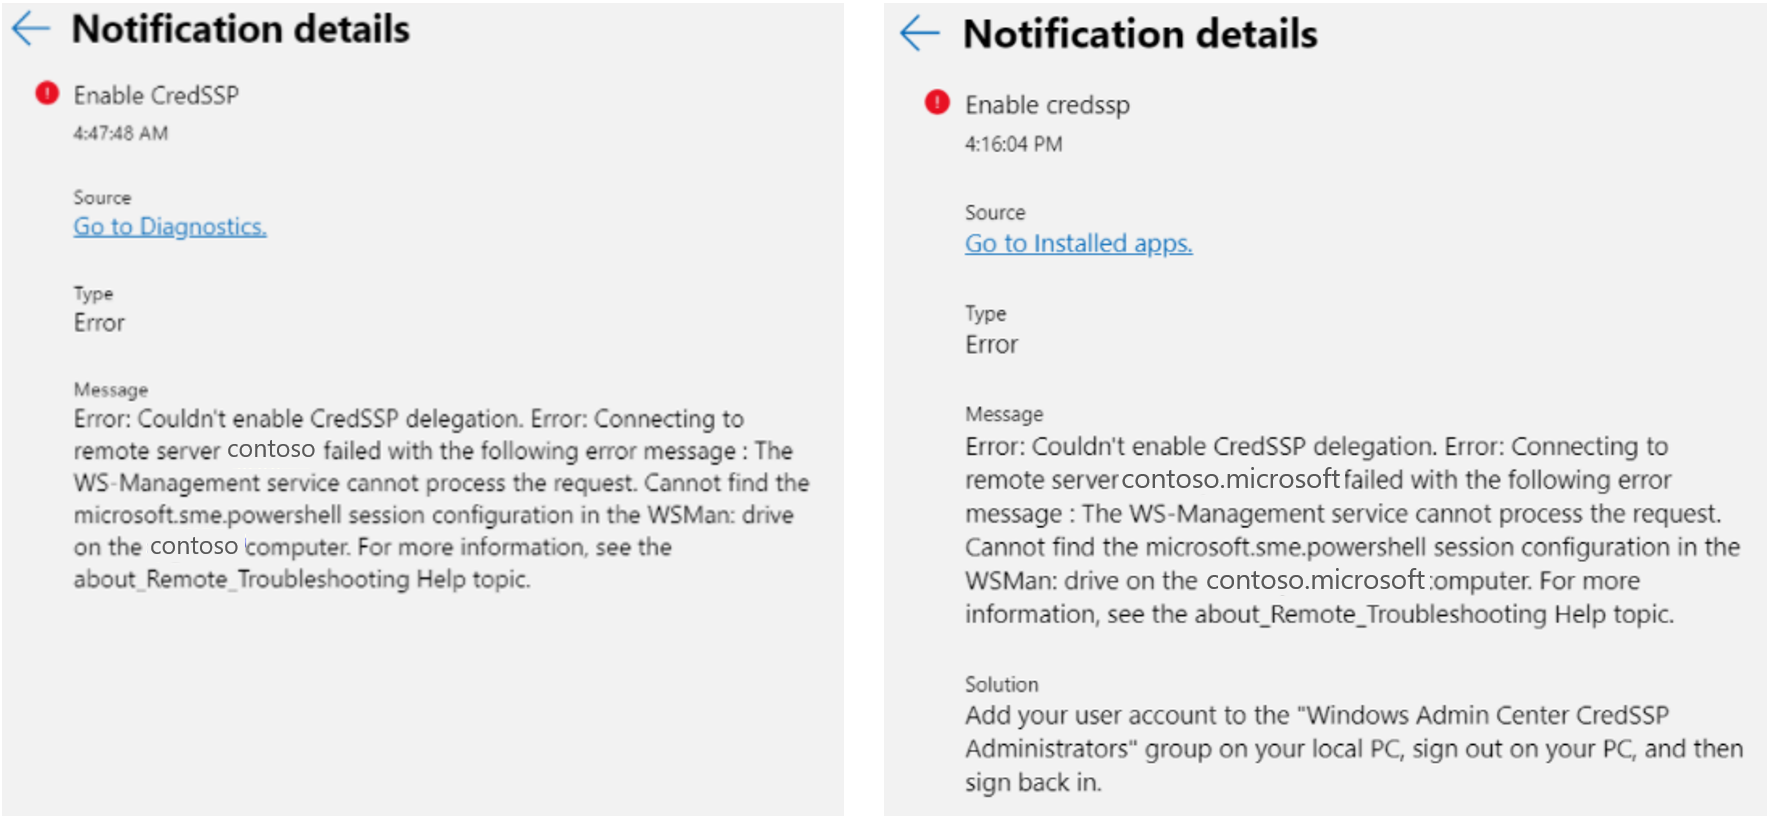 A side by side comparison of the endpoint permission error notification for Cred S S P in Windows Admin Center.